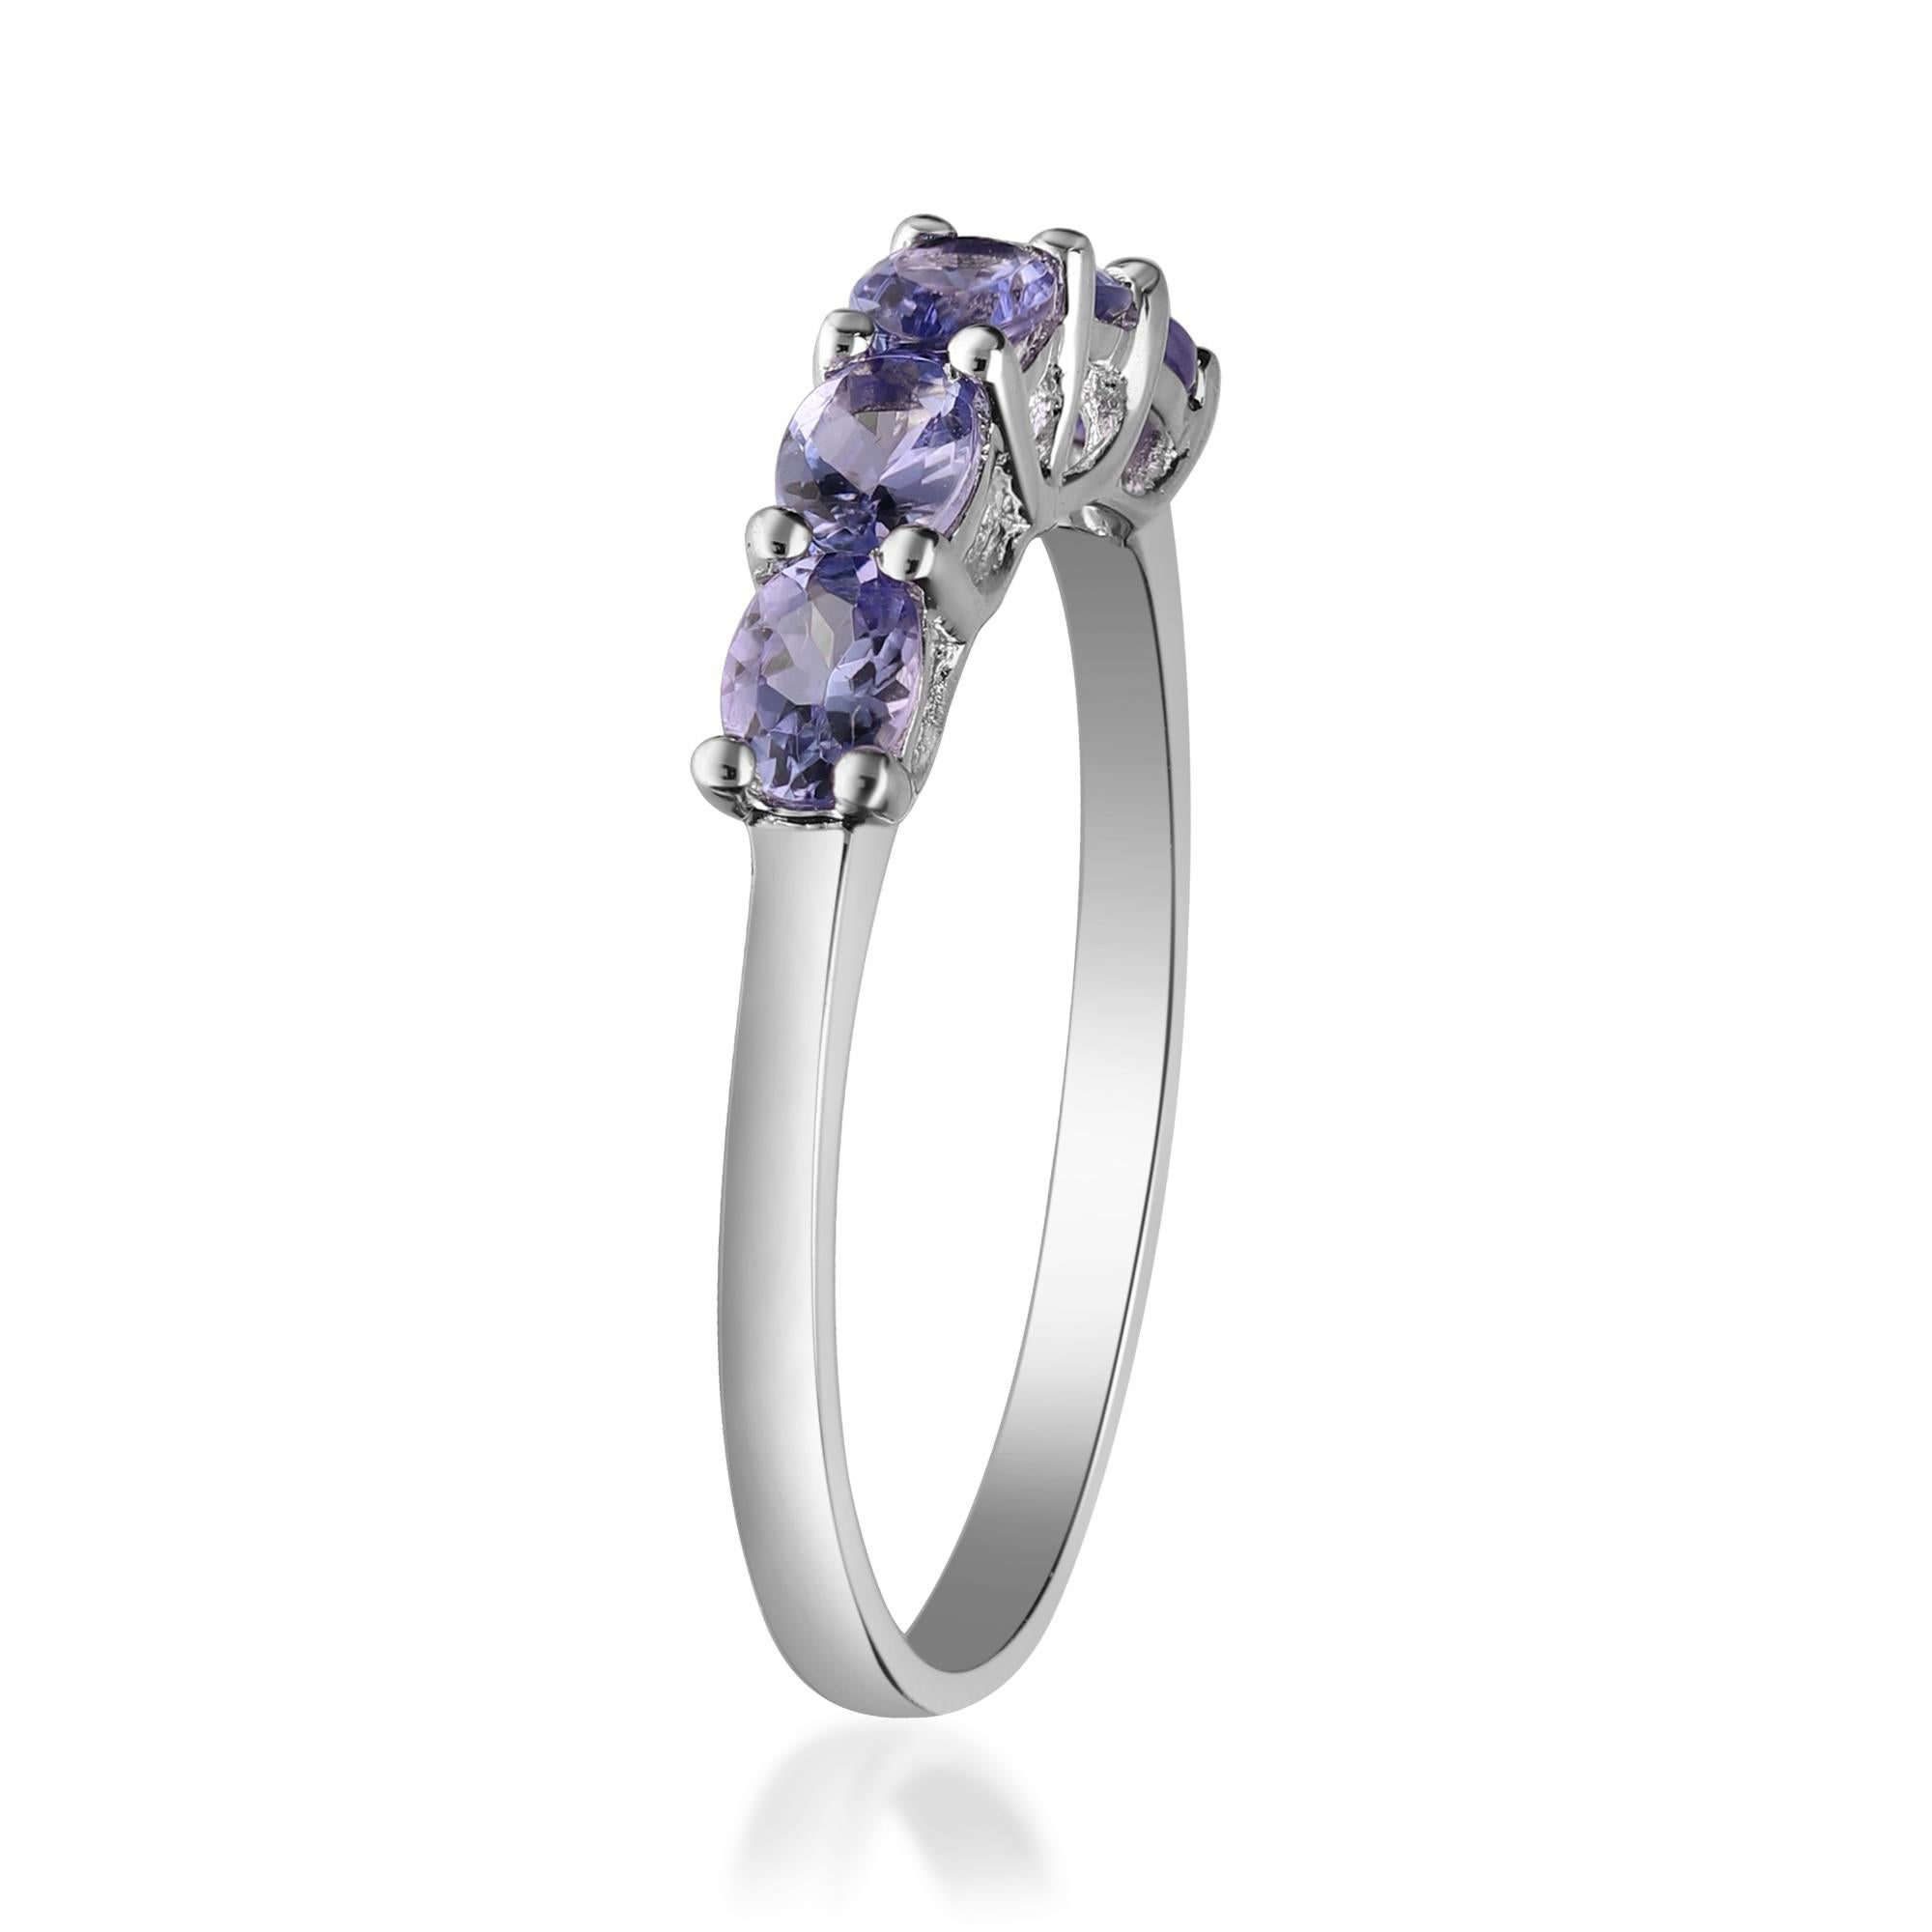 Sparkling Heart Shaped 0.60 Ct Tanzanite 925 Sterling Silver Ring 